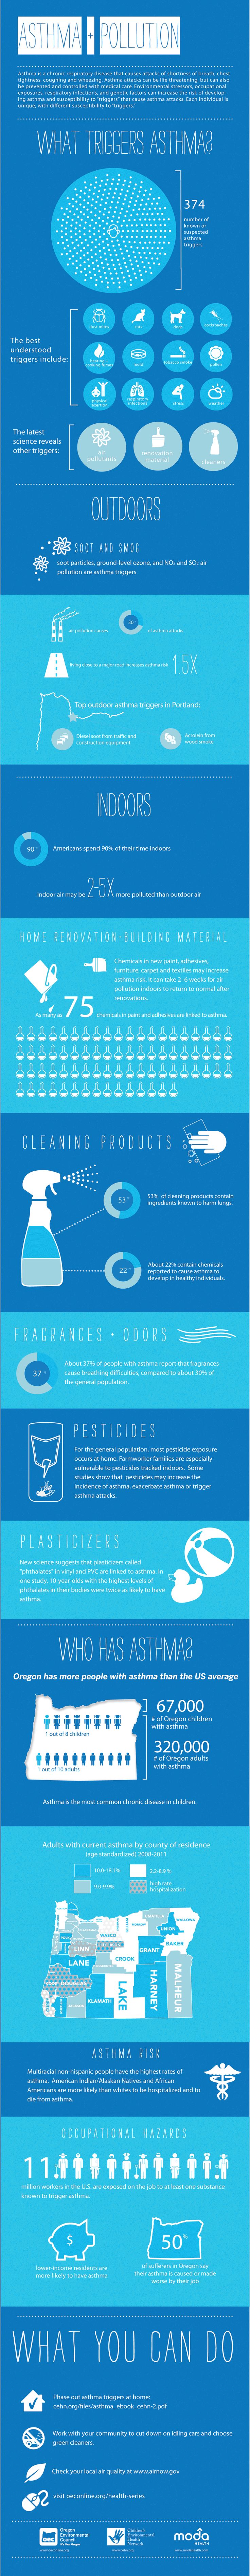 Food infographic - Health Series Infographic: Asthma and Pollution ...